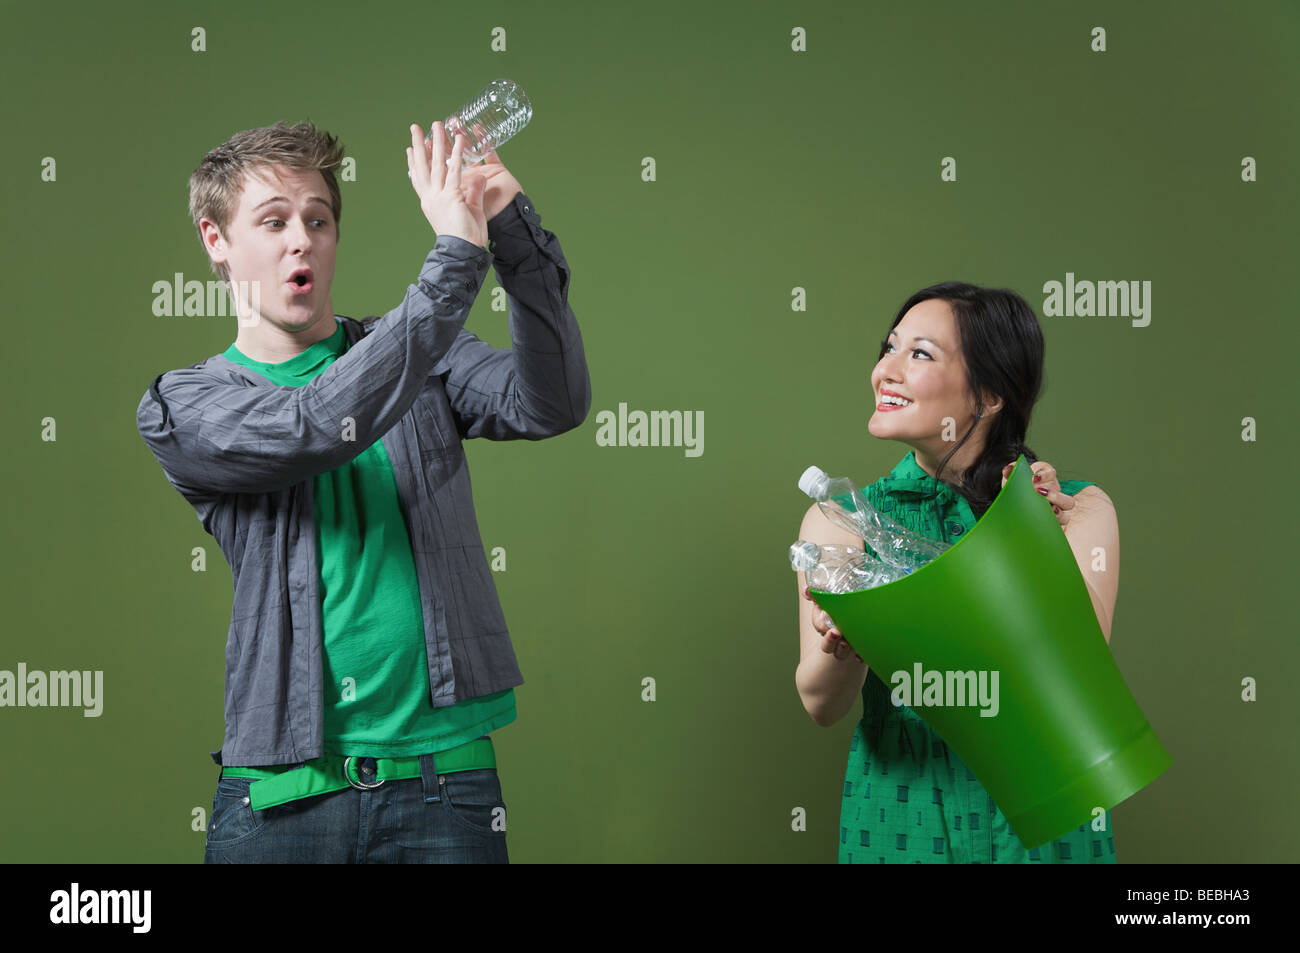 Woman holding a recycling bin and a man looking into an empty water bottle Stock Photo